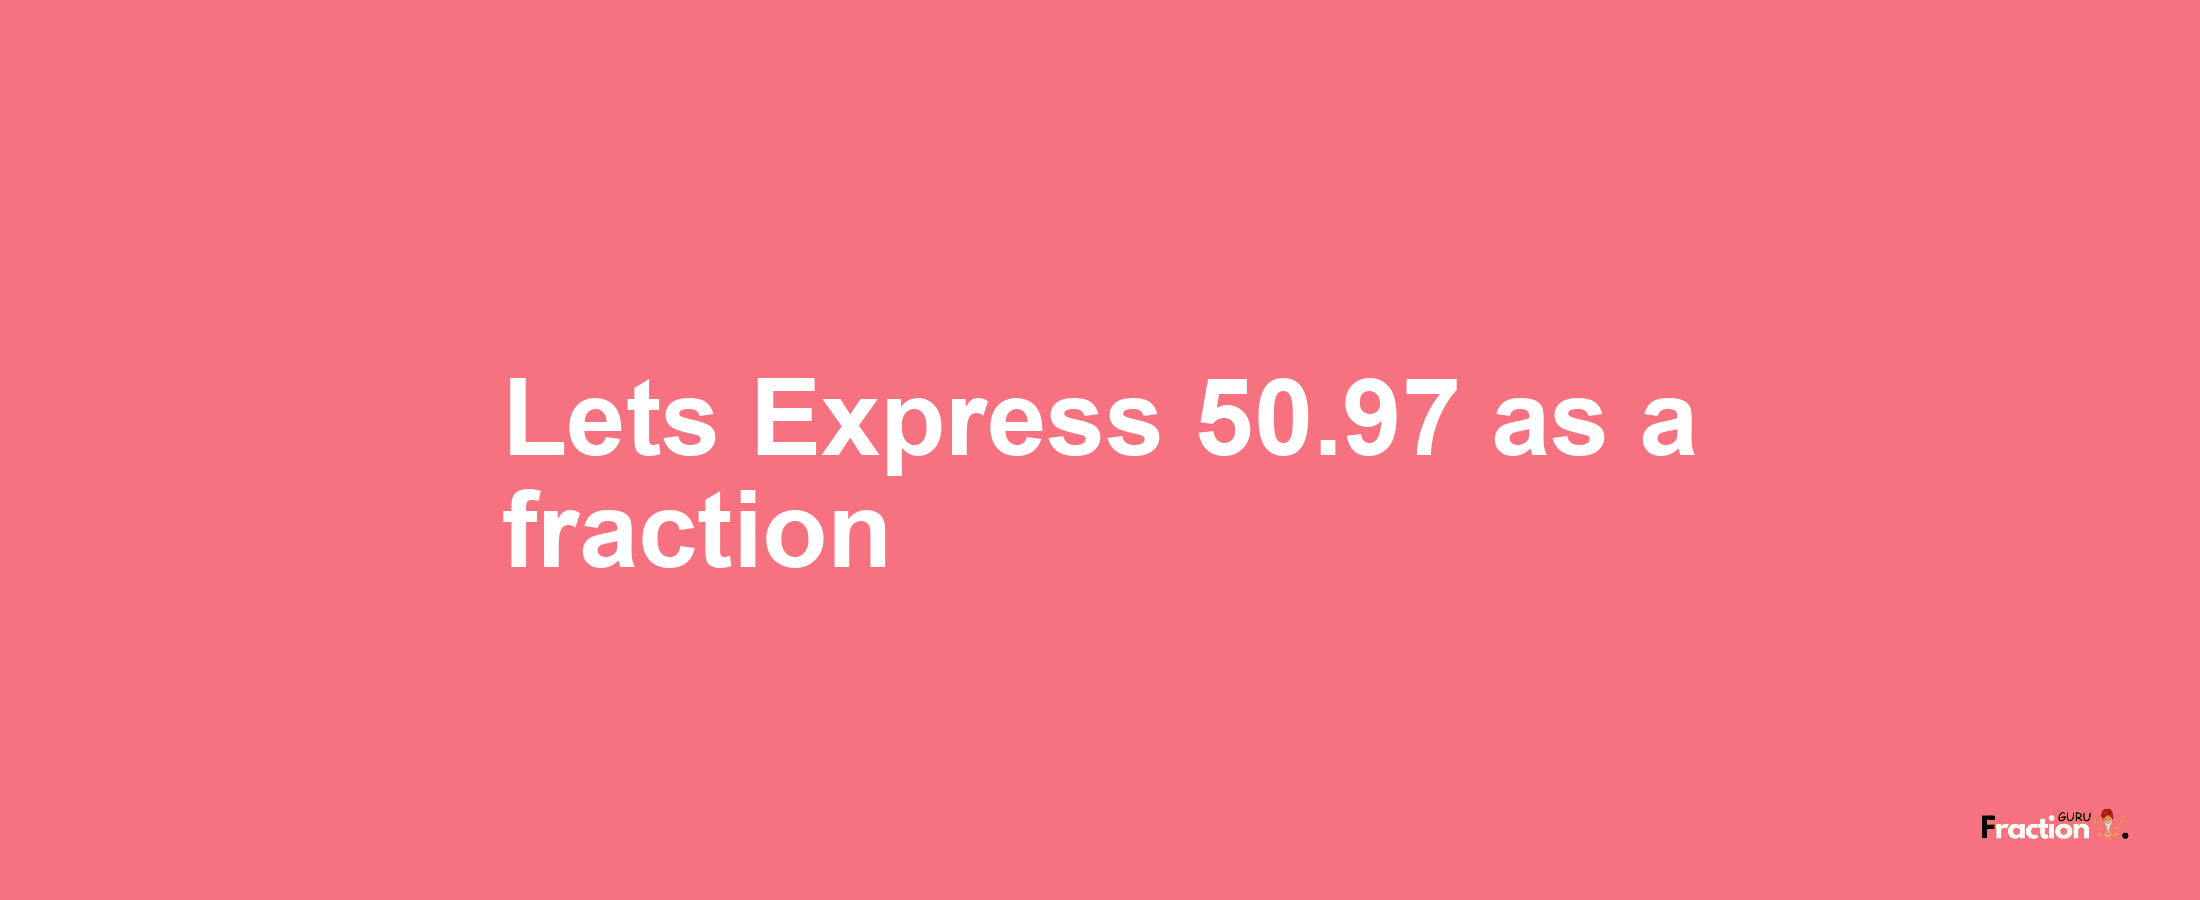 Lets Express 50.97 as afraction